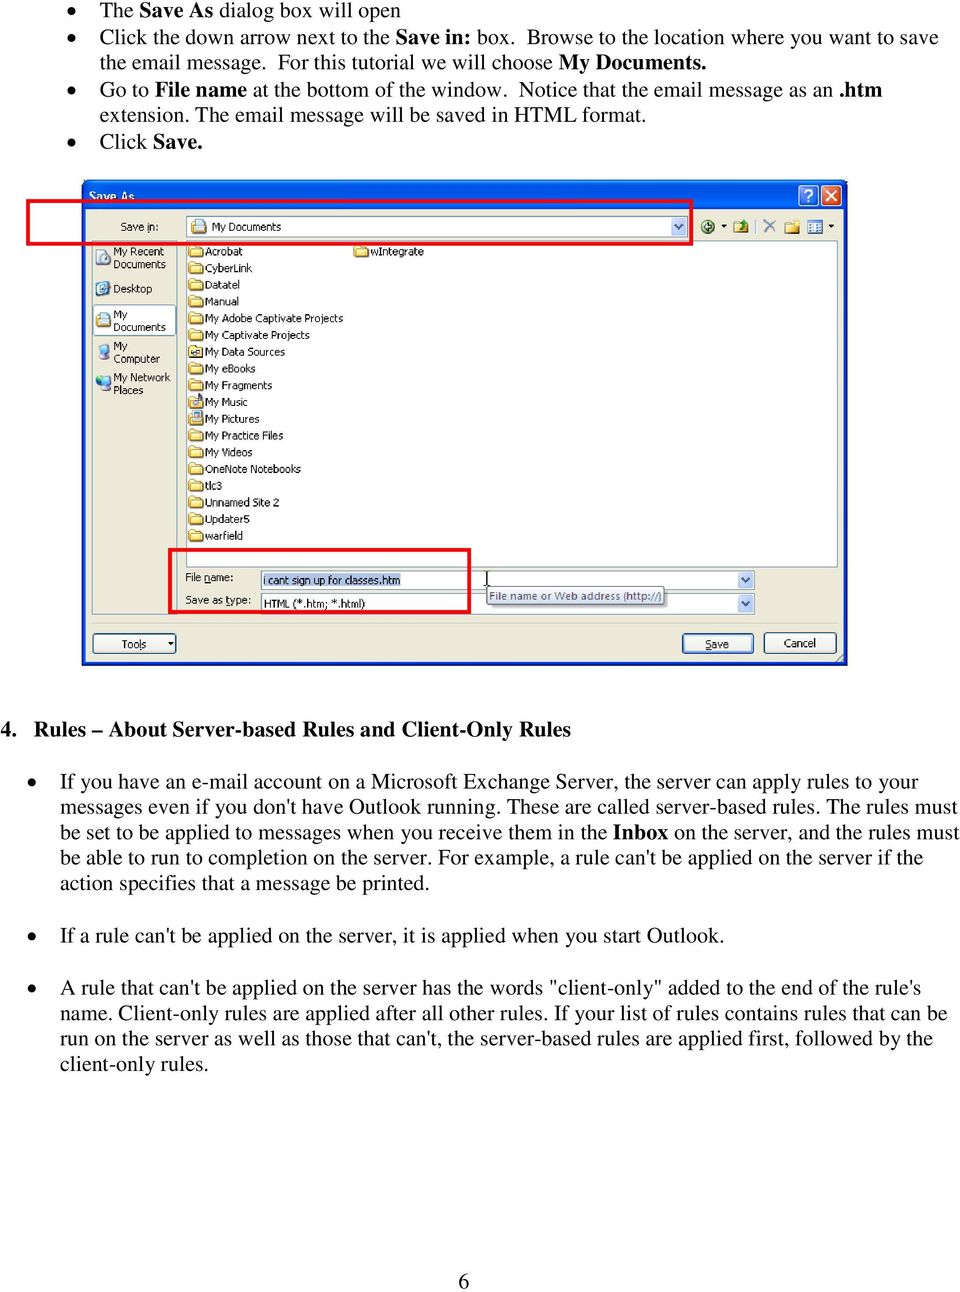 Rules About Server-based Rules and Client-Only Rules If you have an e-mail account on a Microsoft Exchange Server, the server can apply rules to your messages even if you don't have Outlook running.